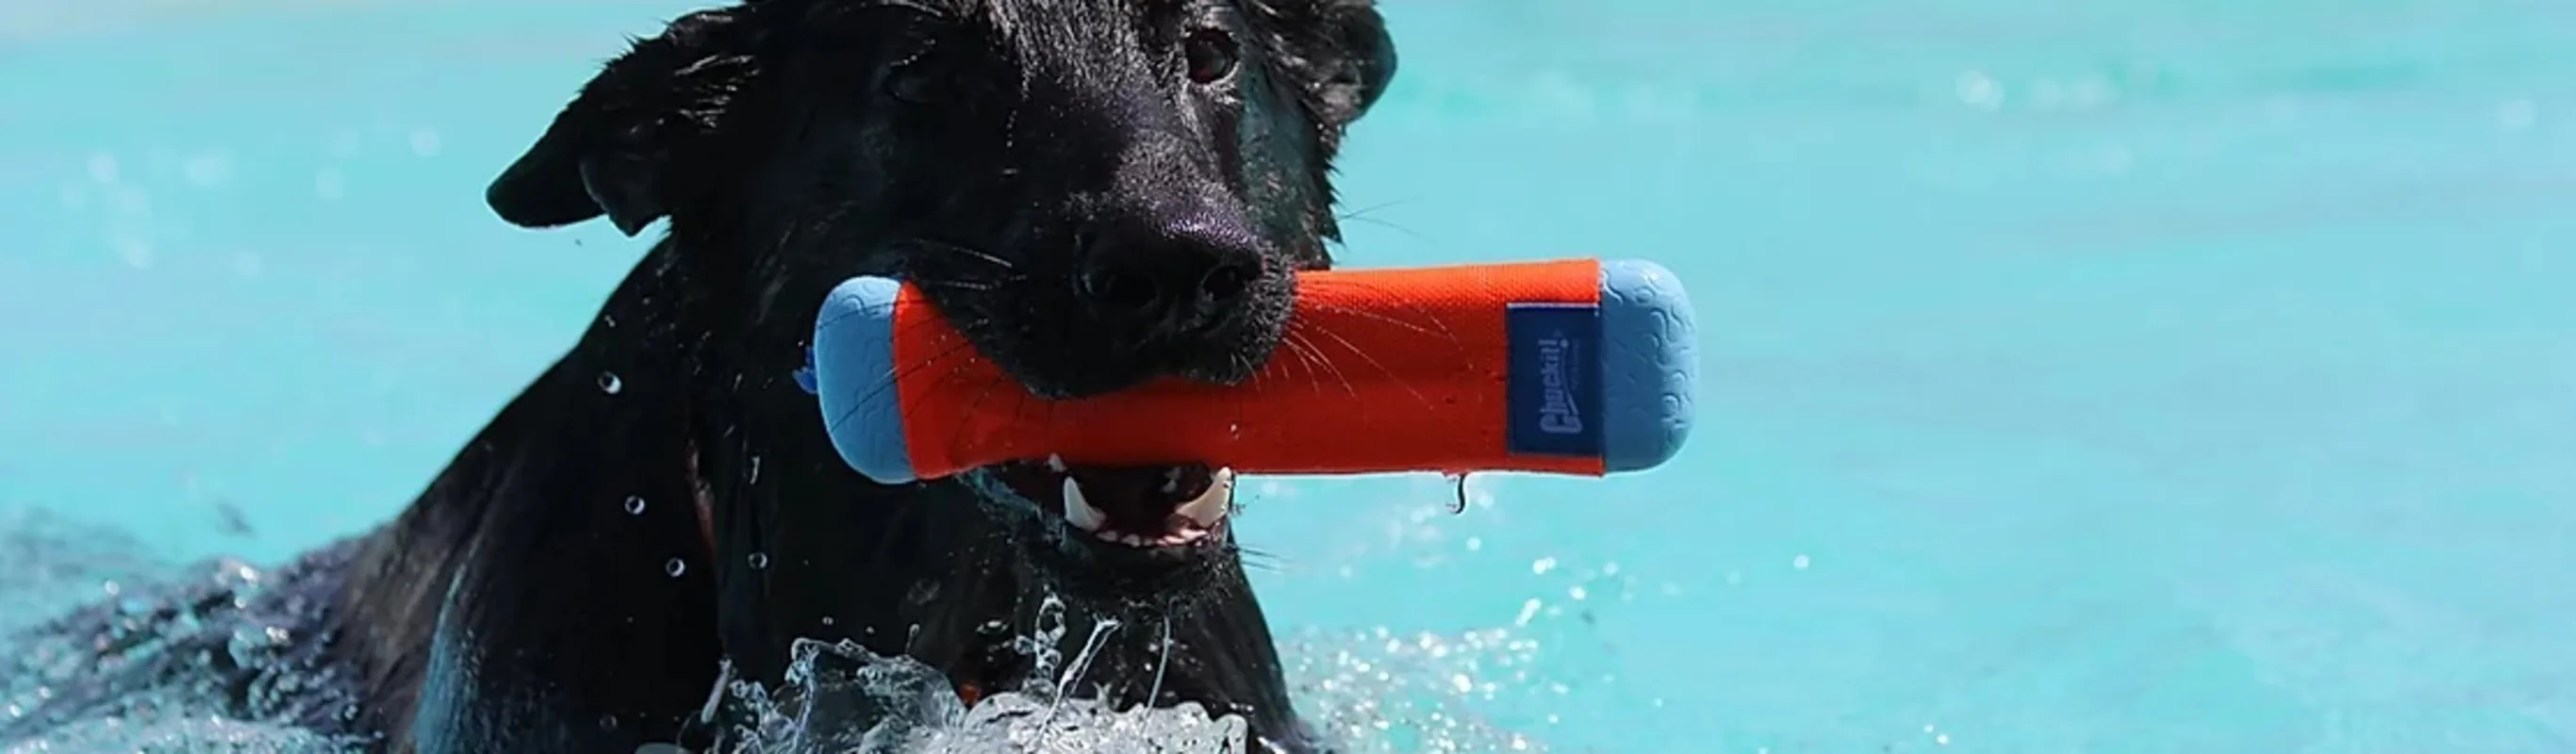 A dog swims with a toy bone in its mouth